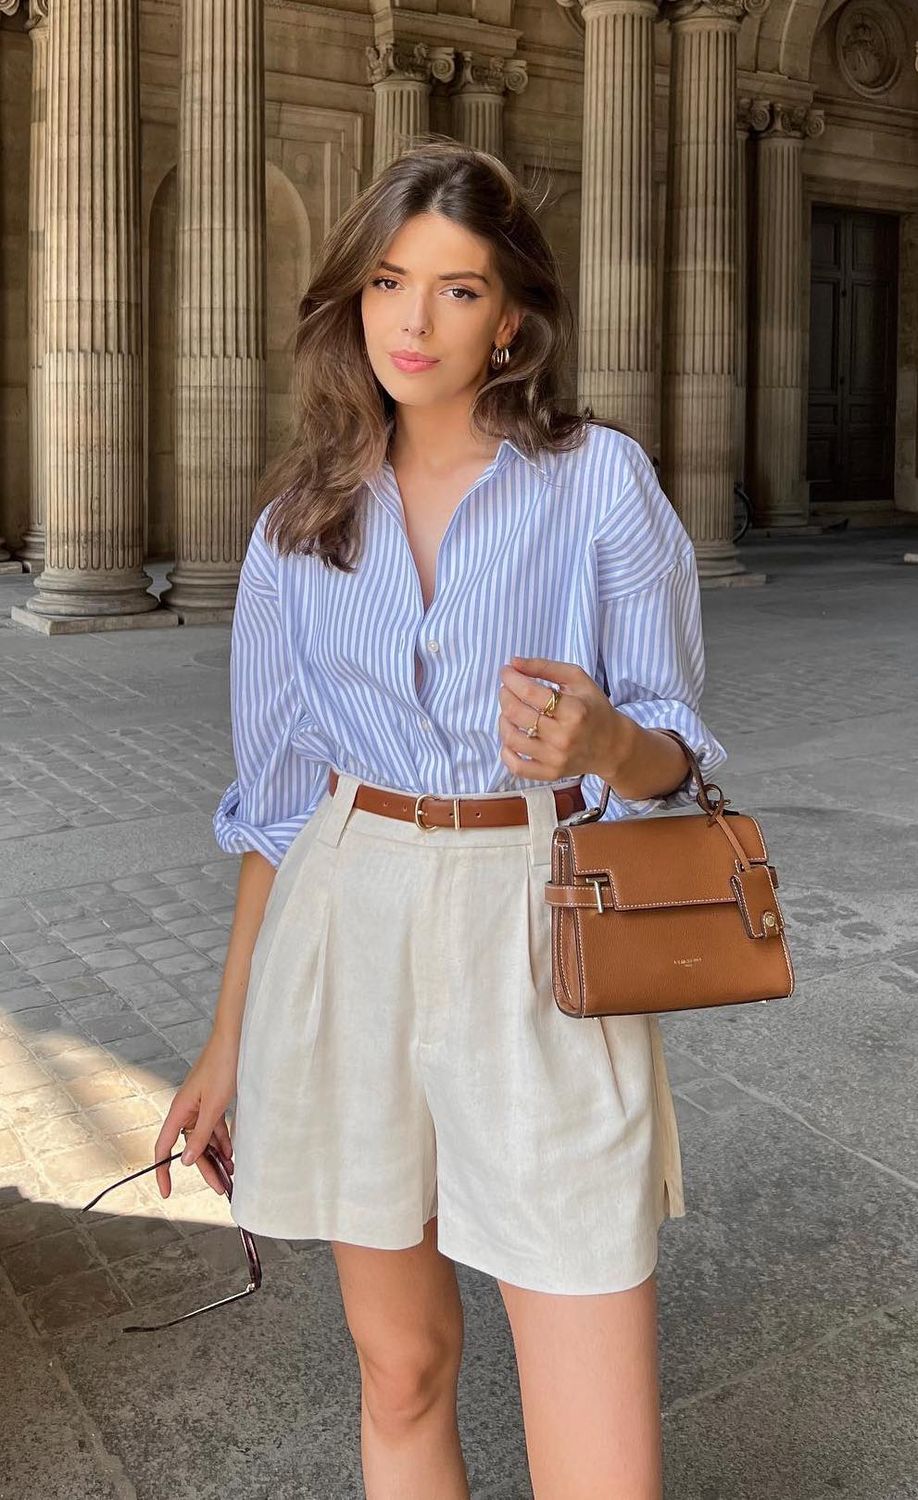 French fashion influencers heloise.guillet